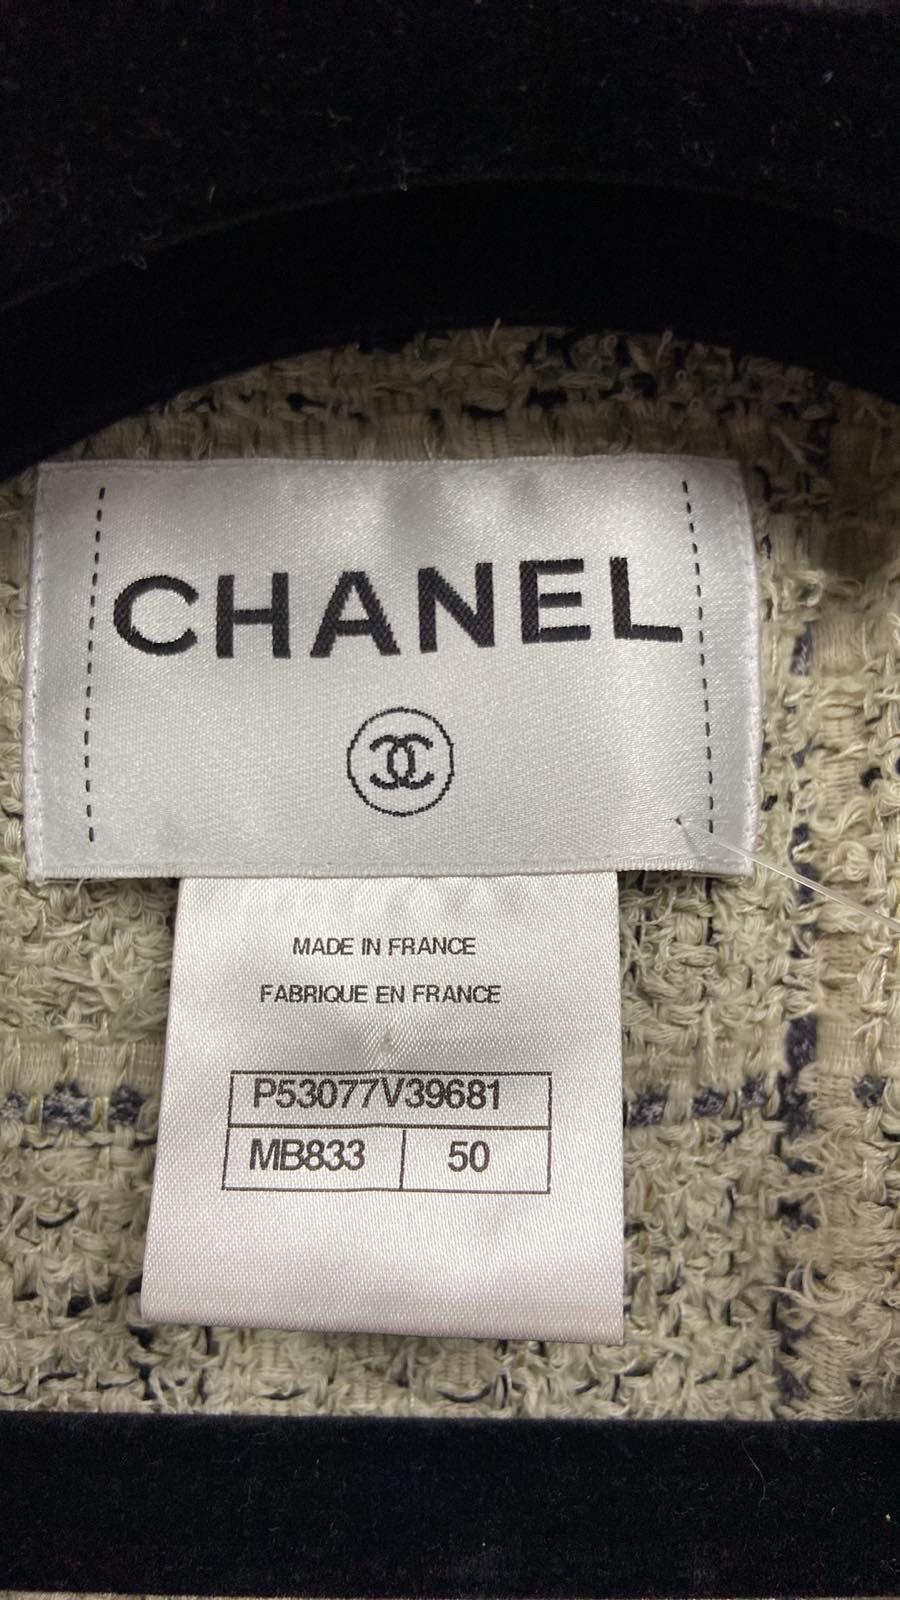 CHANEL Cruise Collection 2015 Tweed Jacket For Sale 4